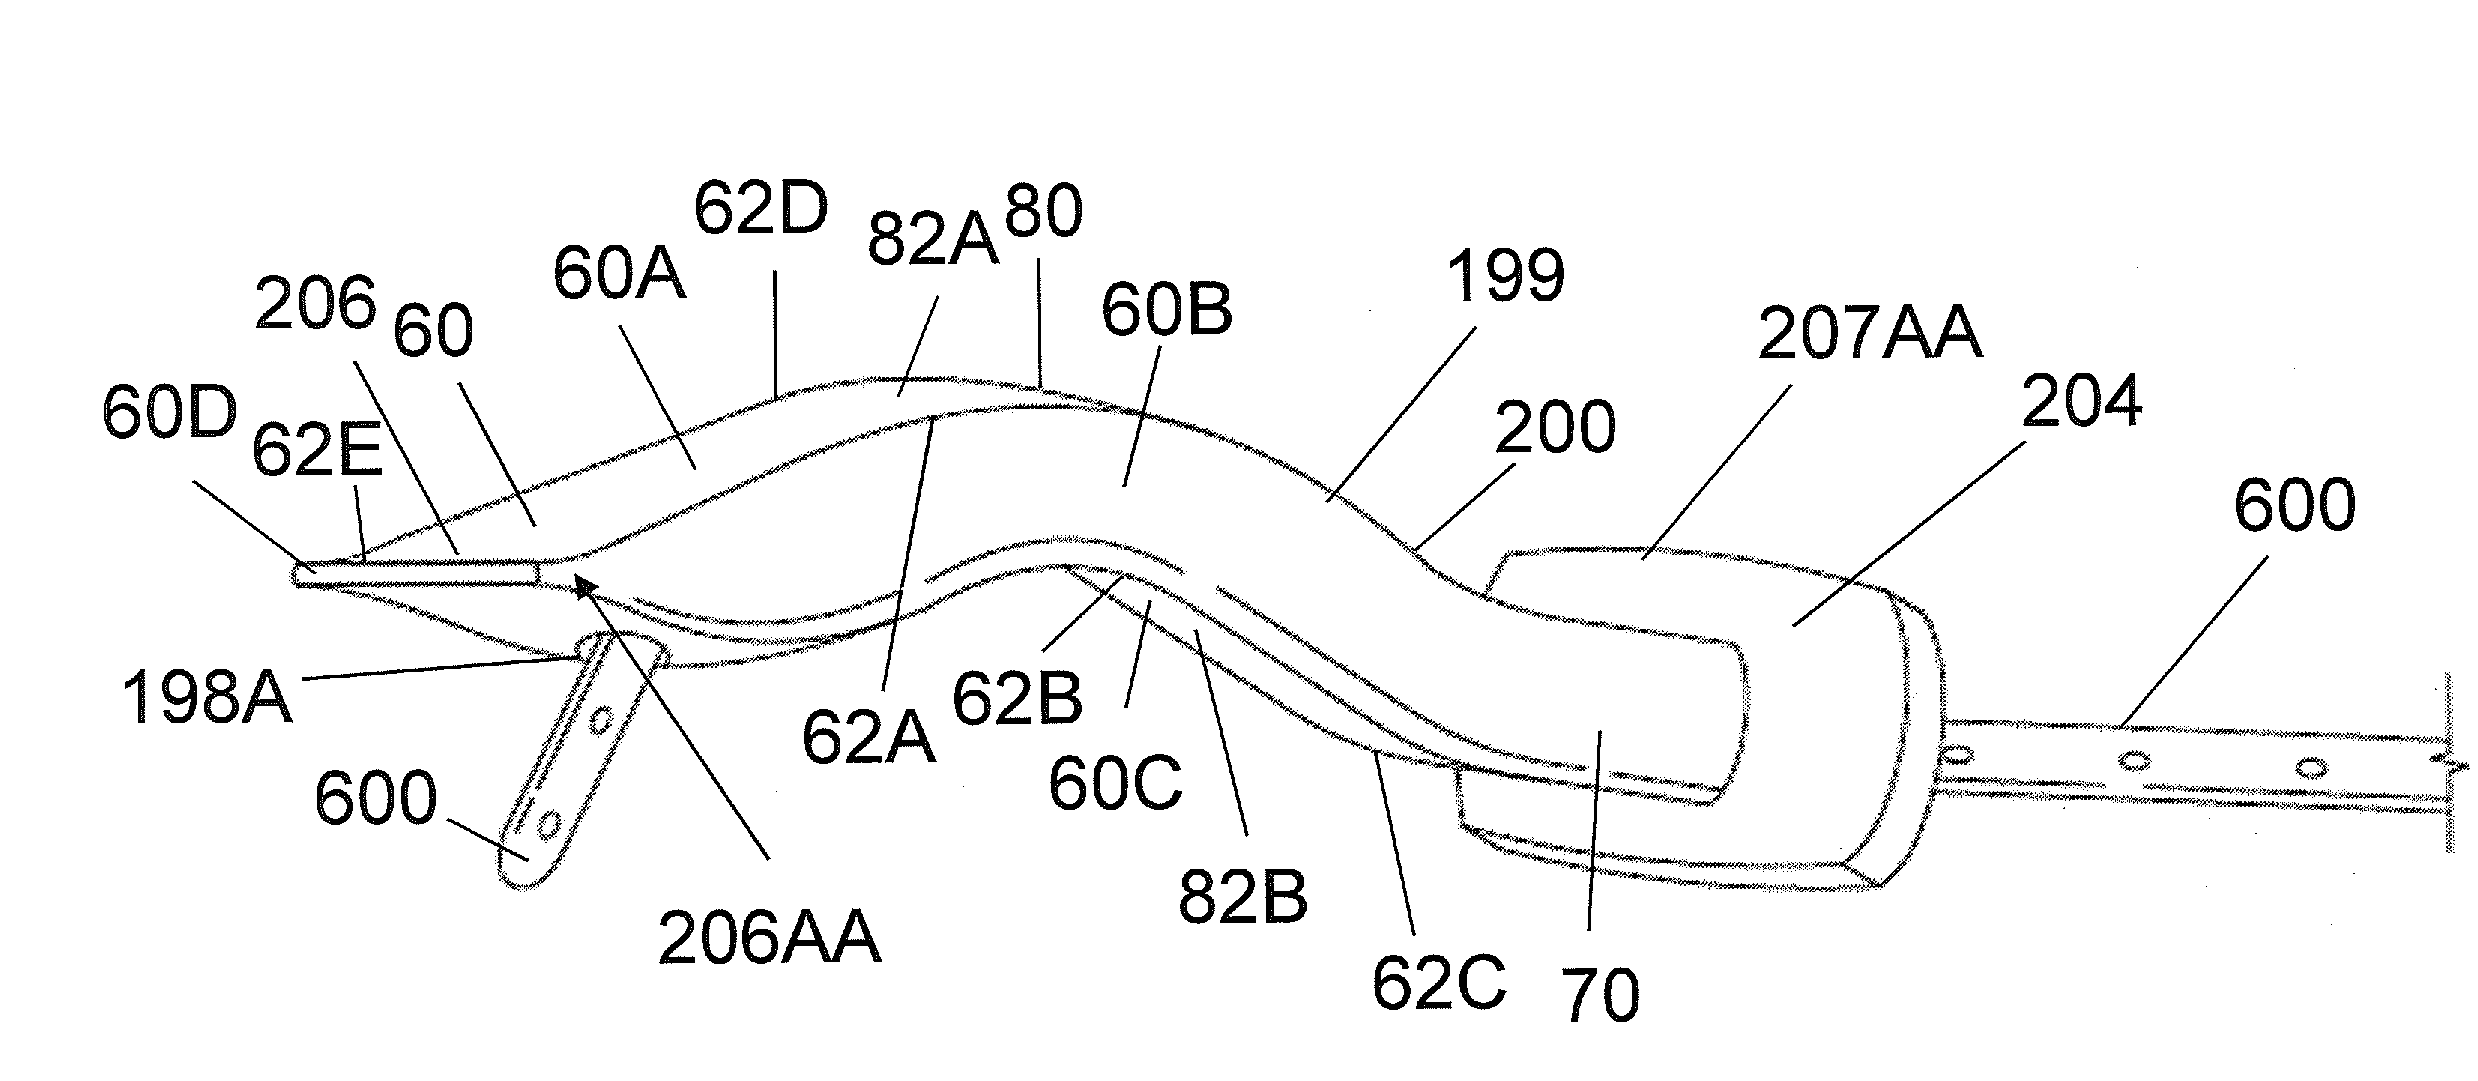 System and methods of intubation